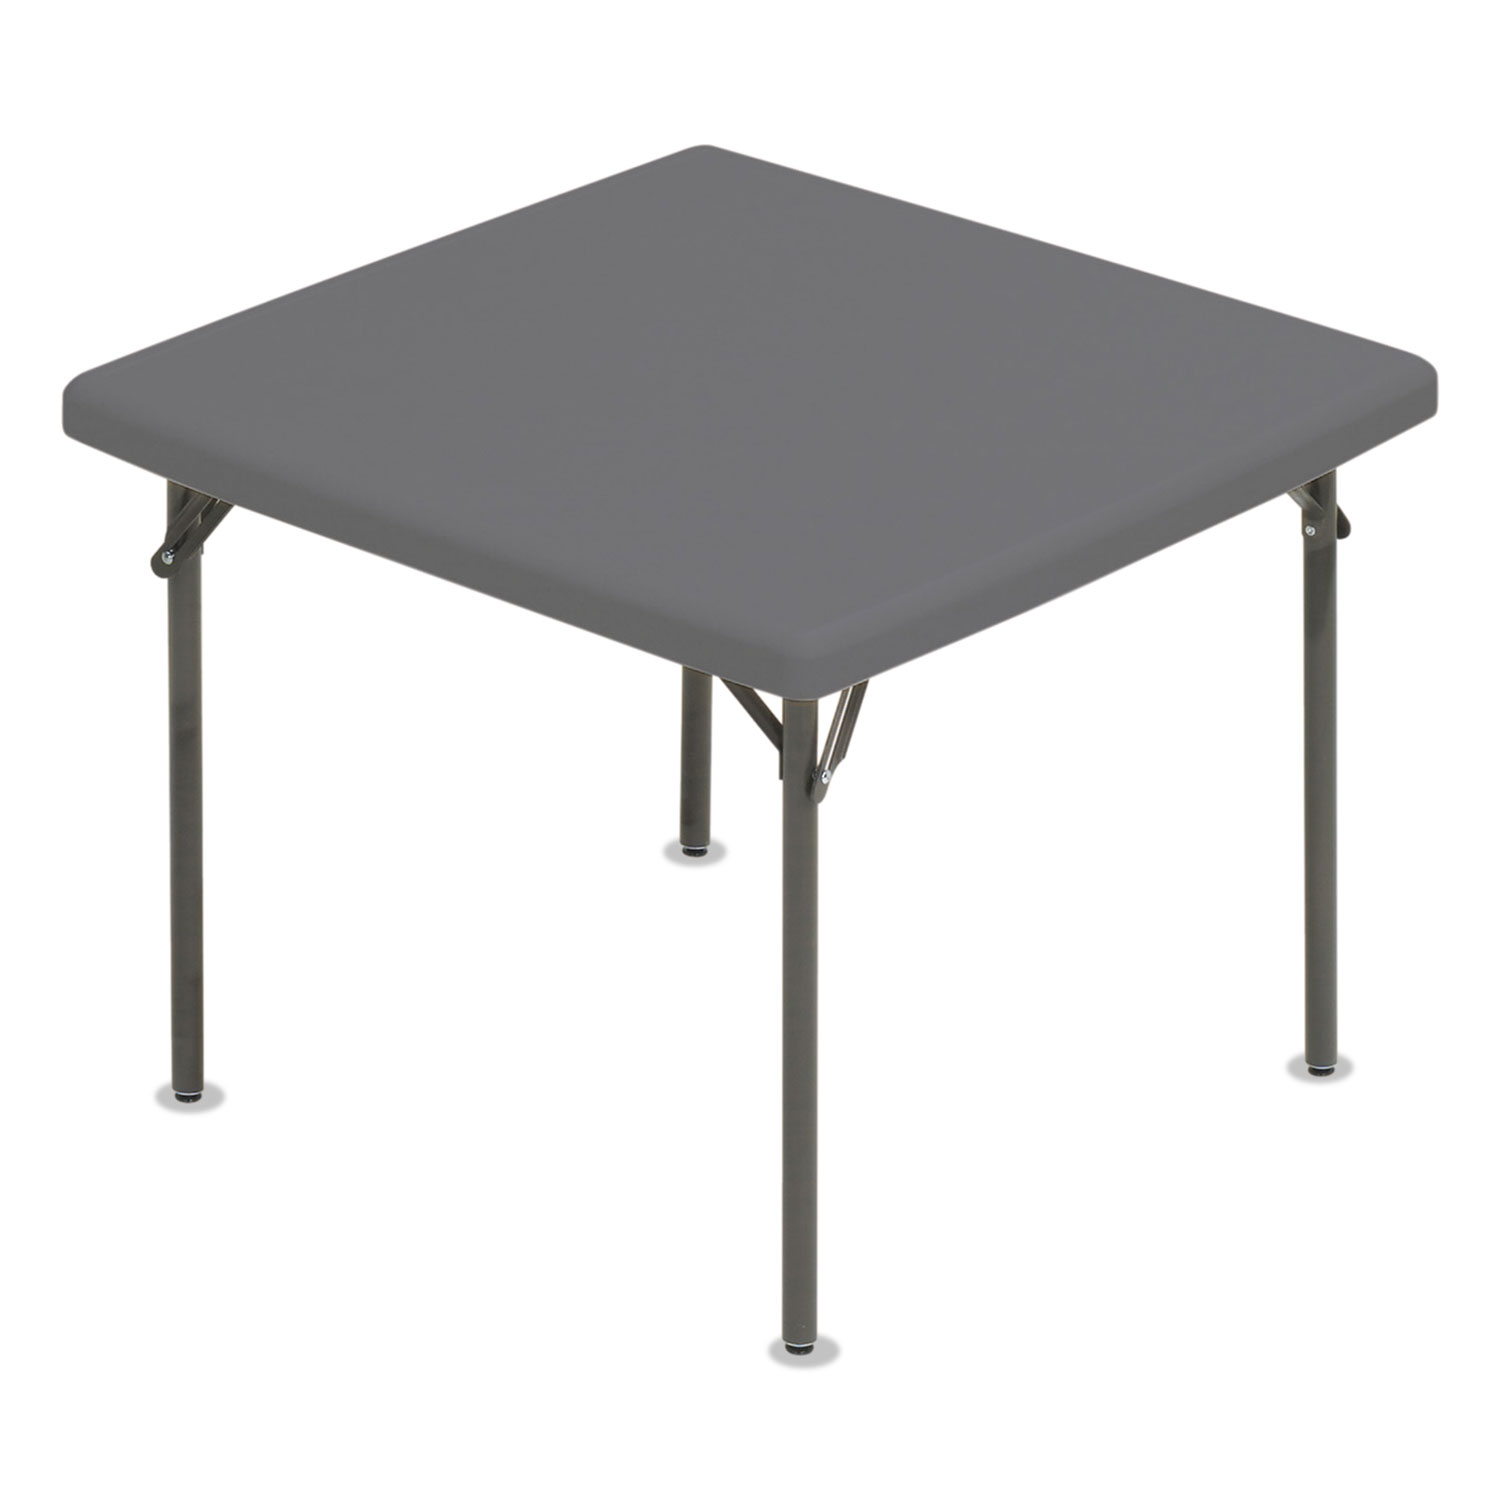 IndestrucTables Too 1200 Series Resin Folding Table, 37w x 37d x 29h, Charcoal